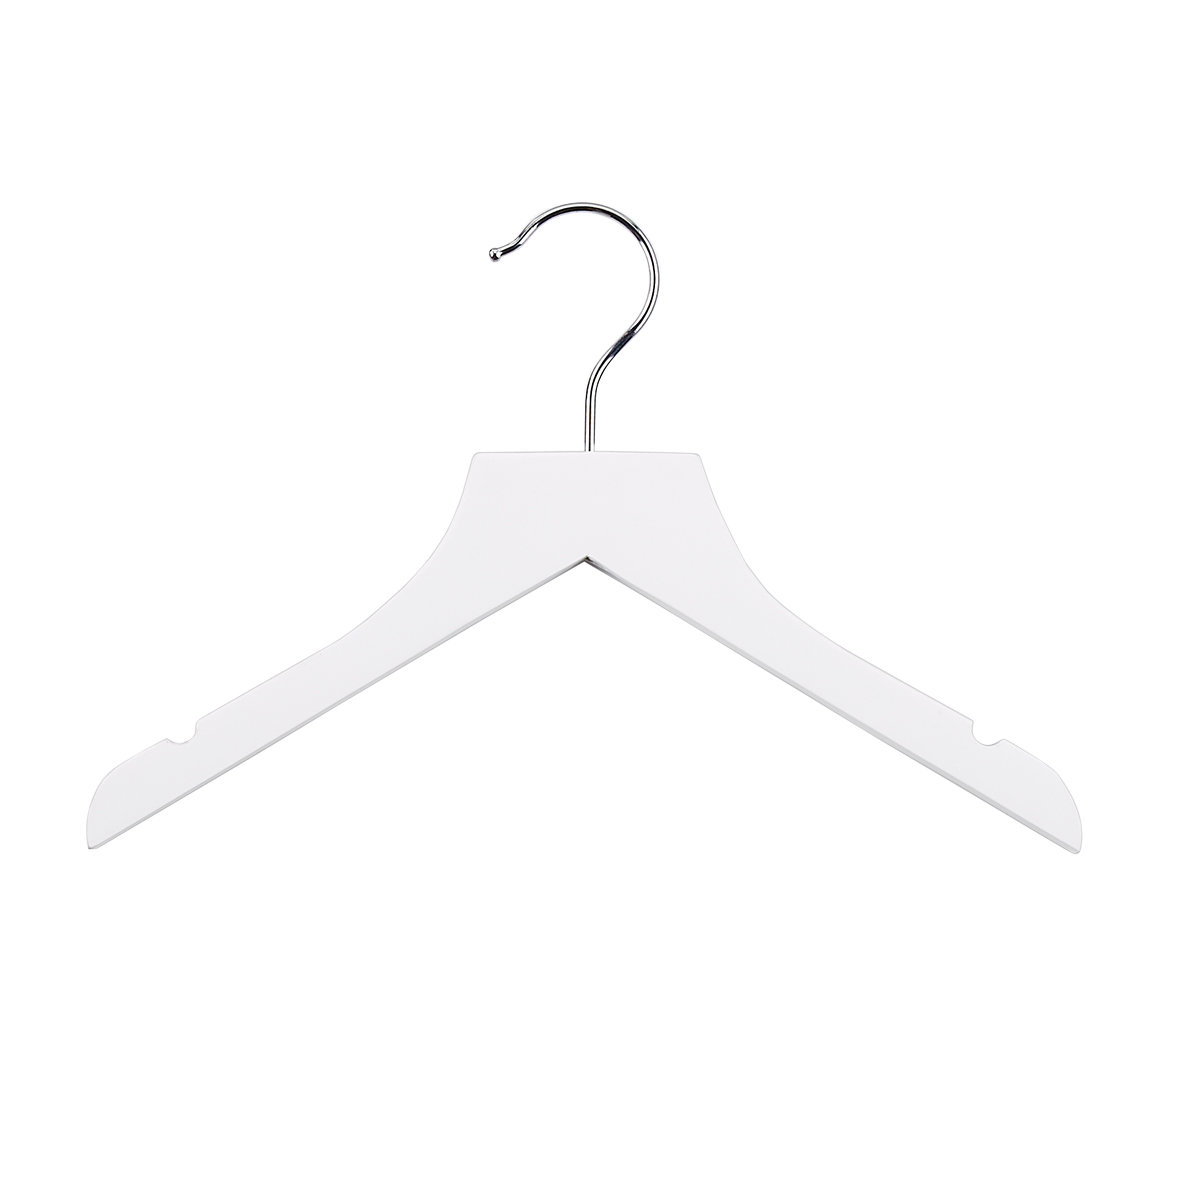 https://www.containerstore.com/catalogimages/383779/10079402-kids-wood-hanger-white-pack.jpg